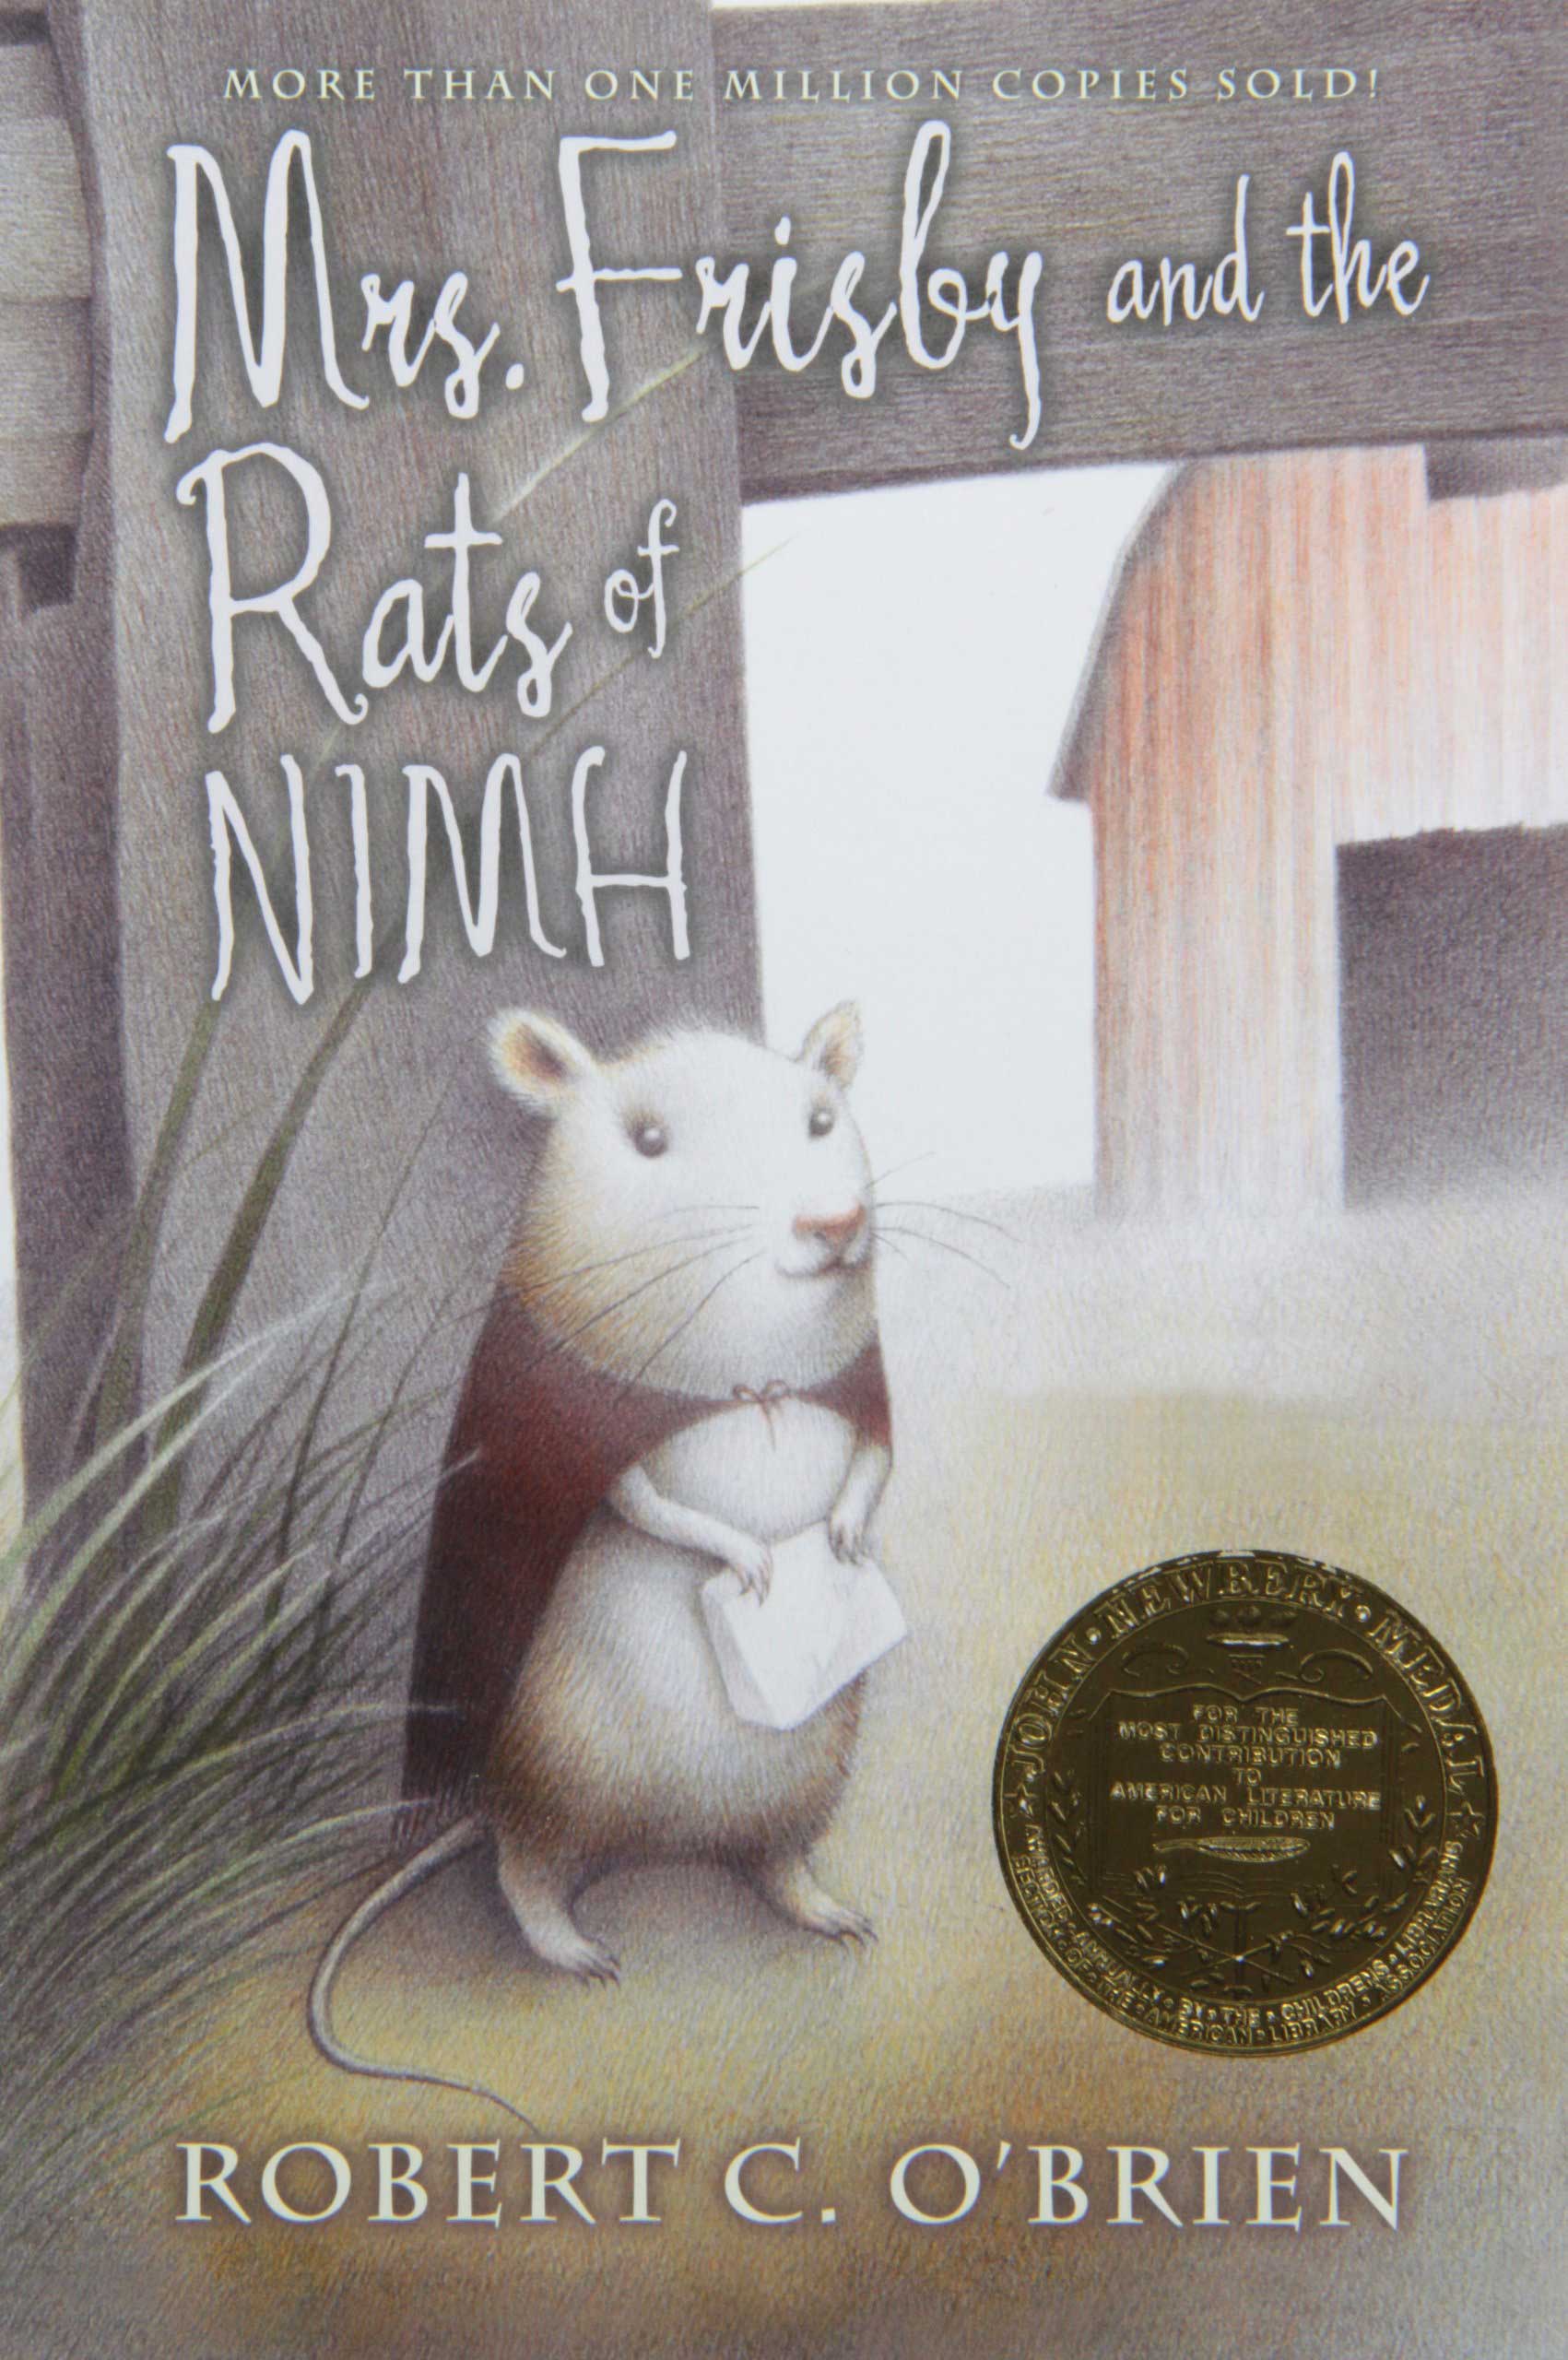 Mrs. Frisby and the Rats of NIMH, by Robert C. O'Brien.
                              
                              
                              
                              The extraordinary rats of NIMH come to the rescue of Mrs. Frisby and her endangered mouse family.
                              
                              
                              
                              Buy now: Mrs. Frisby and the Rats of NIMH